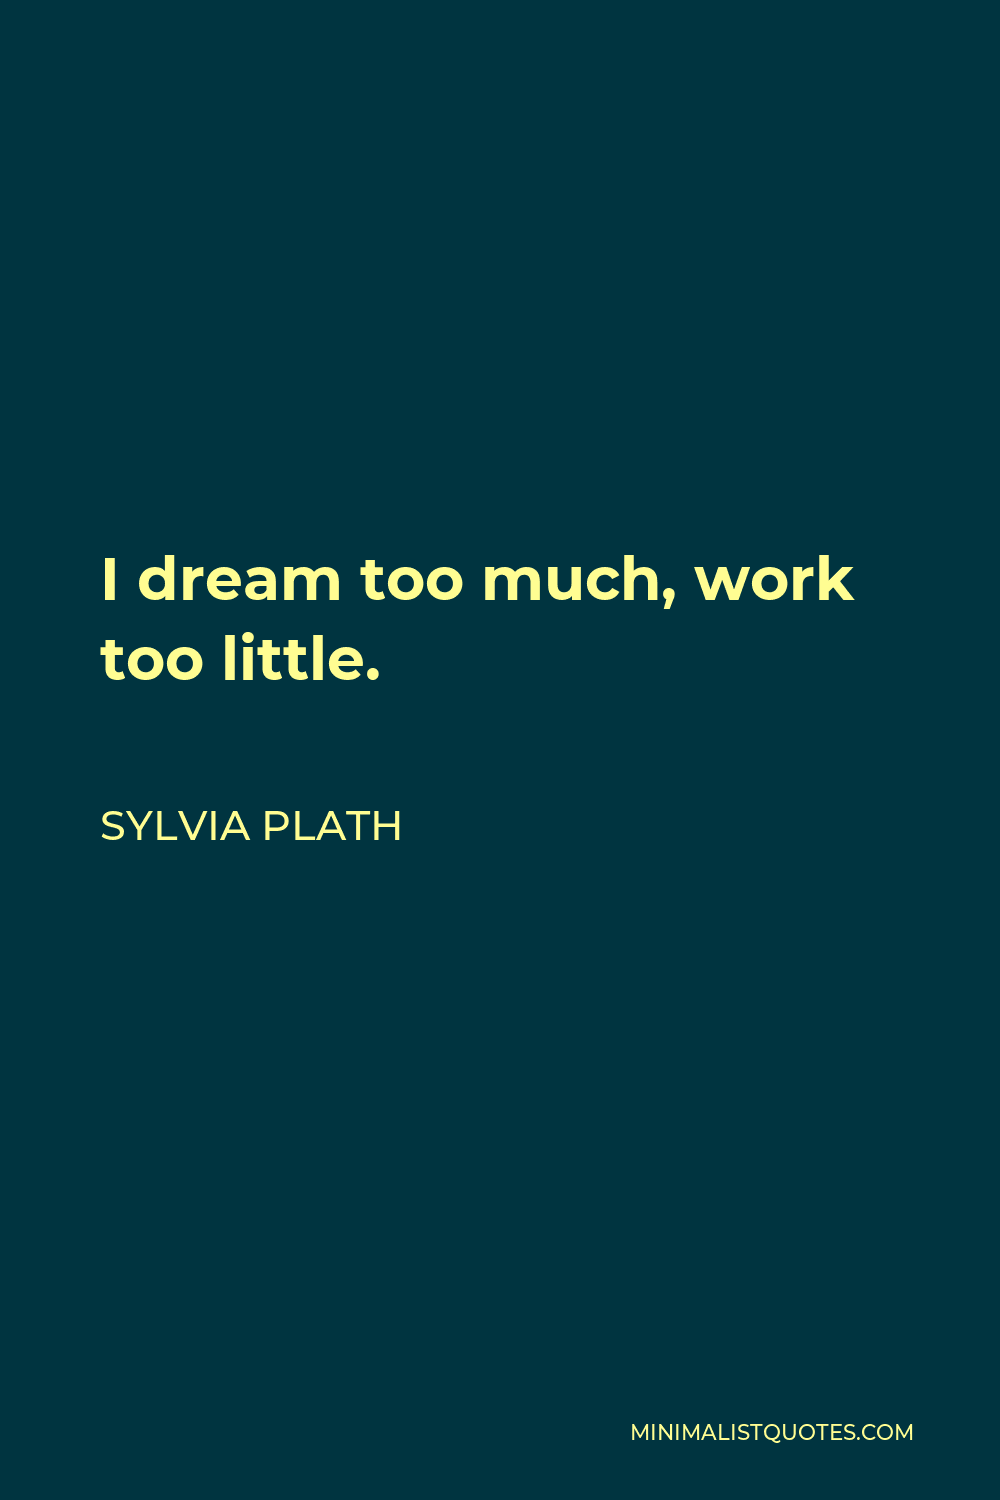 Sylvia Plath Quote - I dream too much, work too little.